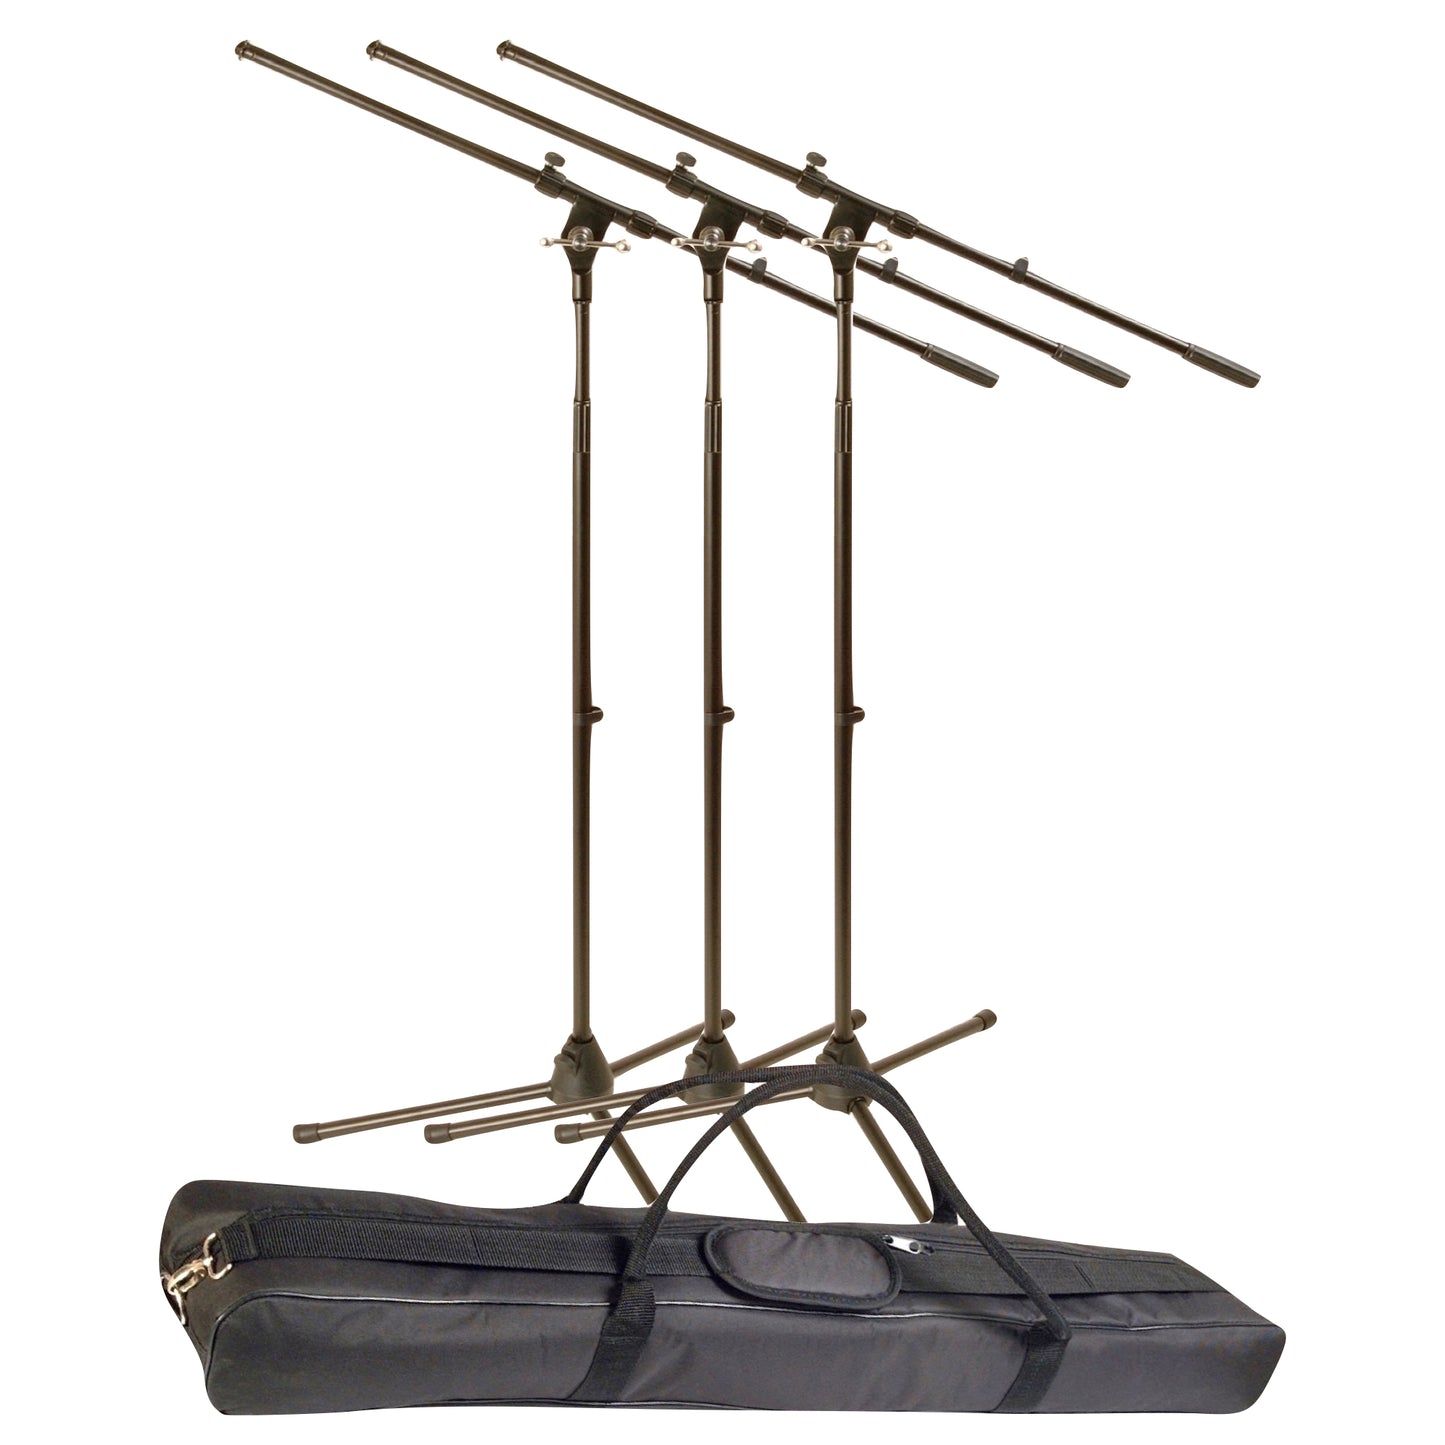 MSP-300 Microphone Stand 3-Pack, with Carry Bag